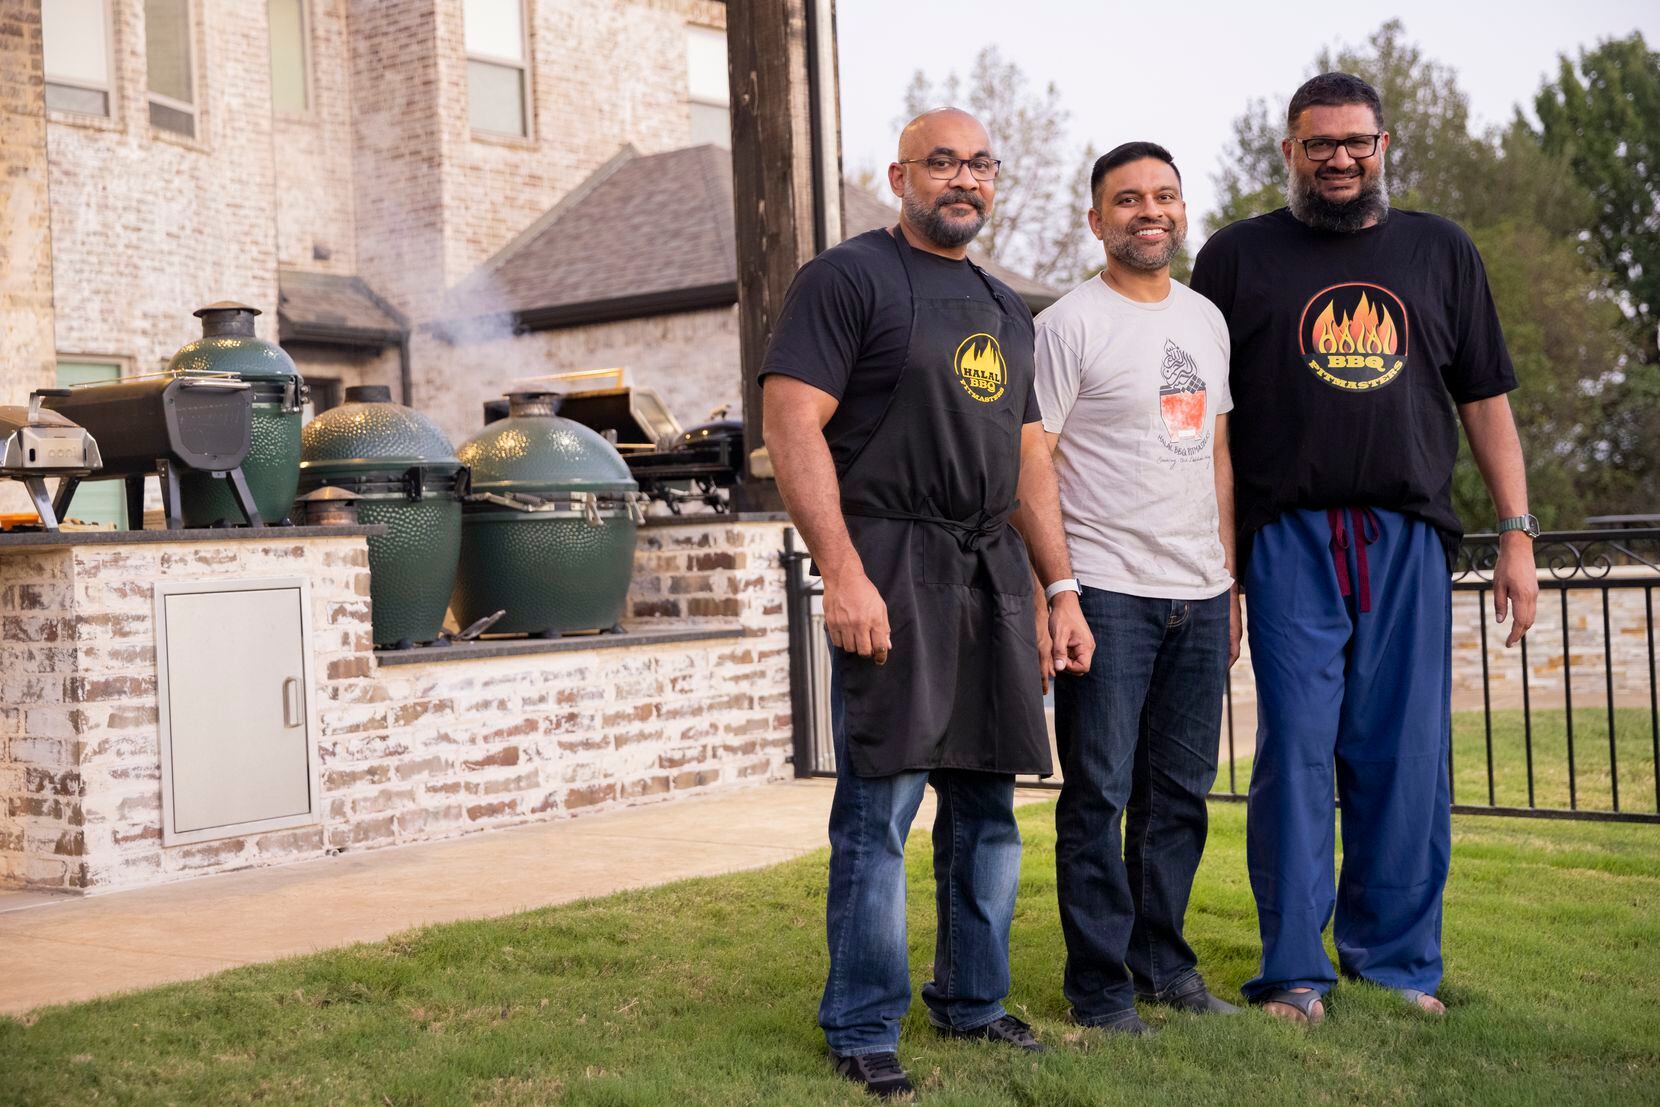 (From left) Founders of the Halal BBQ Pitmasters group Rehan Jaffrey, Zahid Ahmad and Neghae...